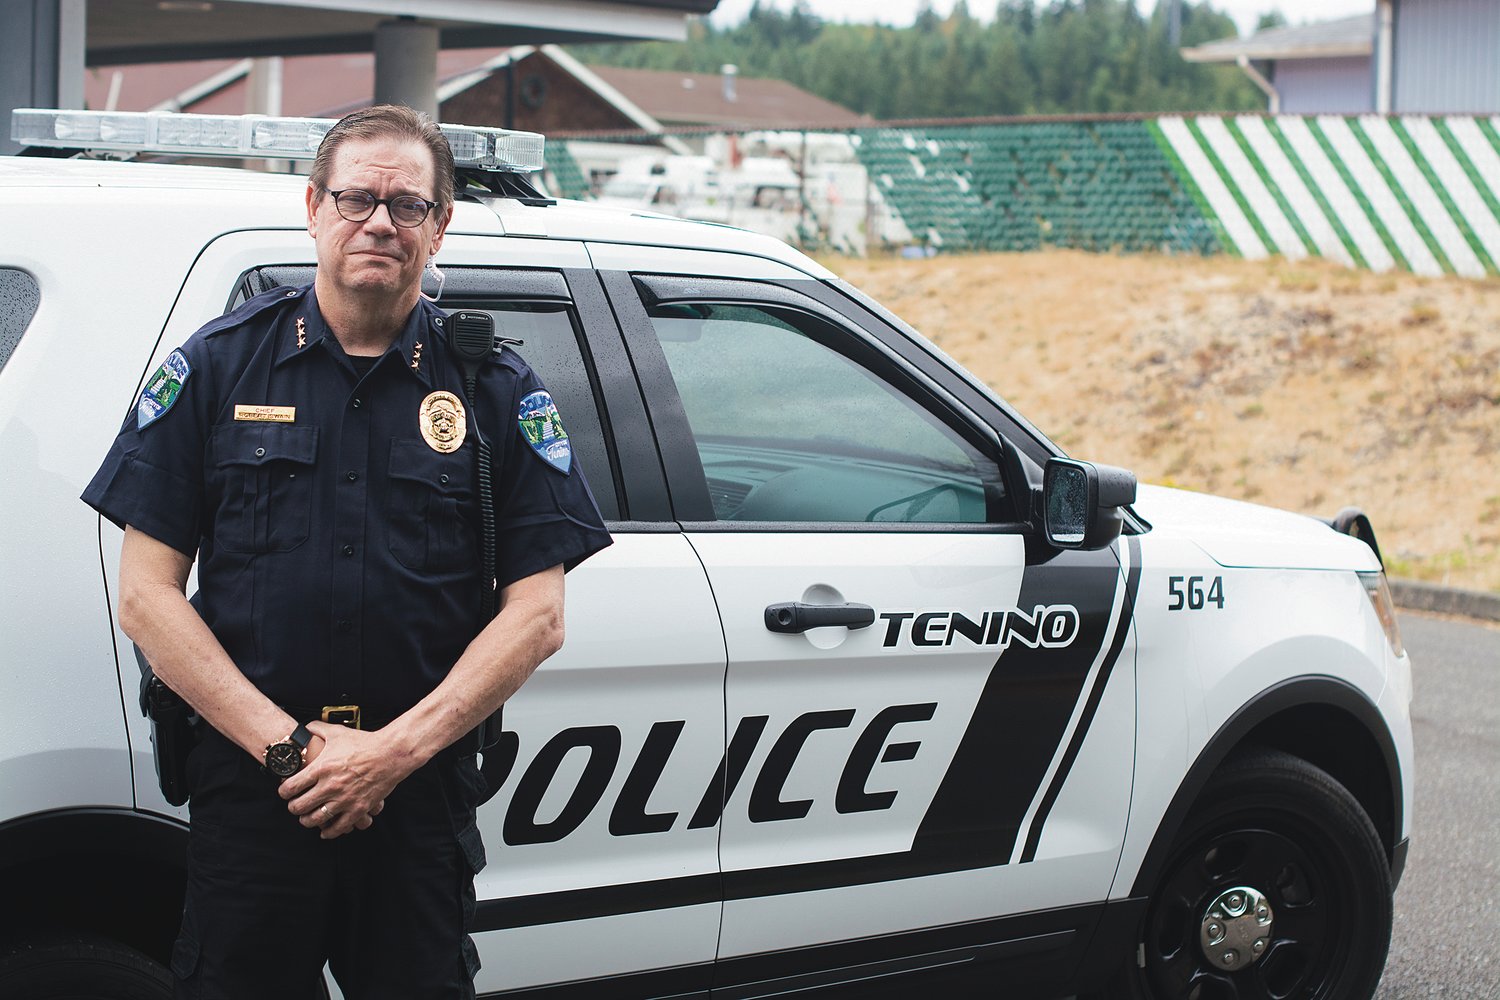 2018 FILE PHOTO — New Tenino Police Chief Robert Swain stands outside the police station in Tenino in 2018.